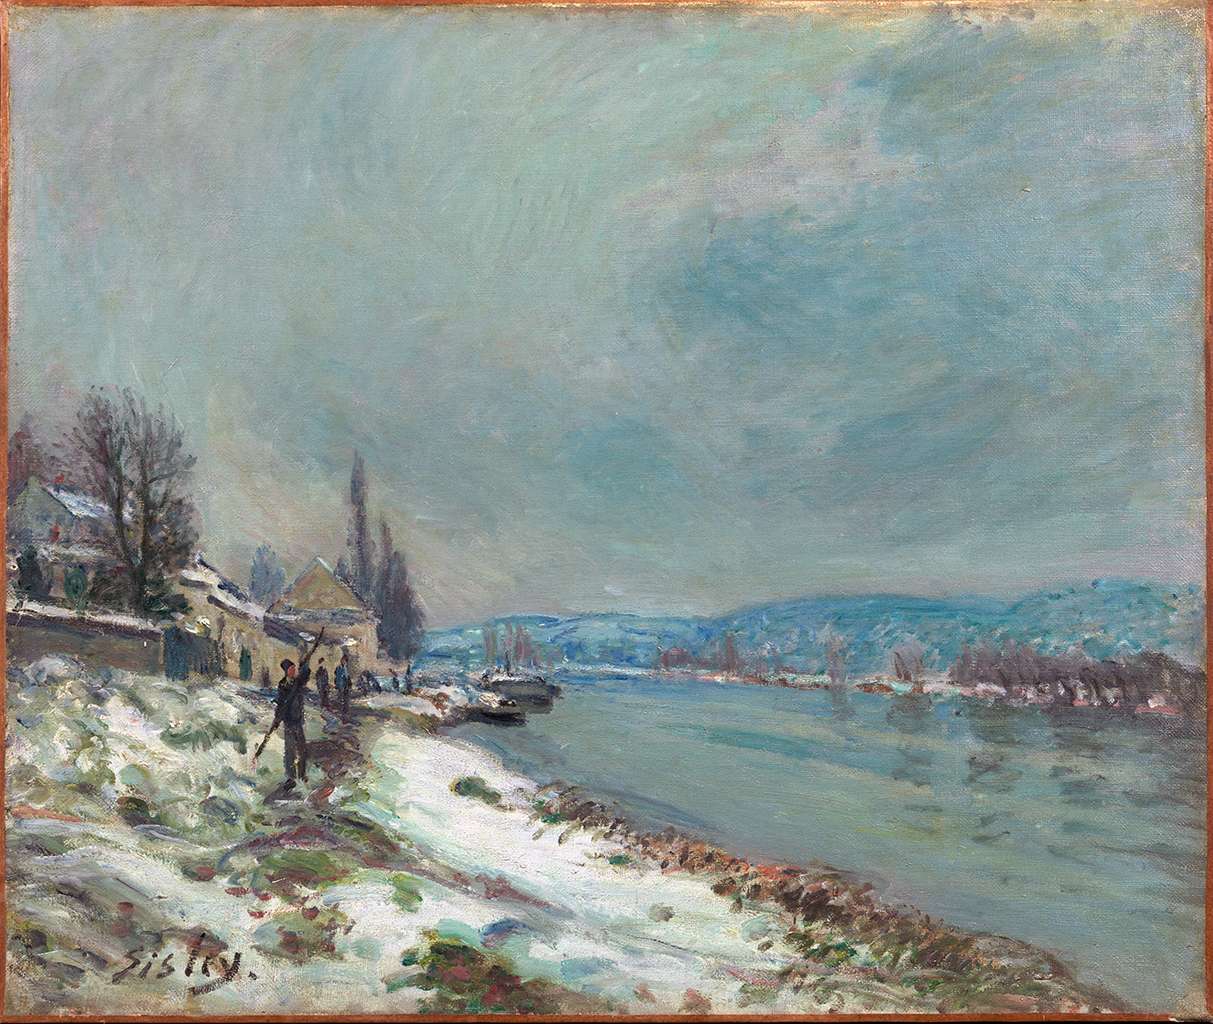 A painting depicting a riverbank covered in snow along a large river. On the bank there is a variety people walking and standing along a dirt trail.  Behind that trail is the outskirts of a small town. The background sky is made of blues and grays which are reflecting on the river below.